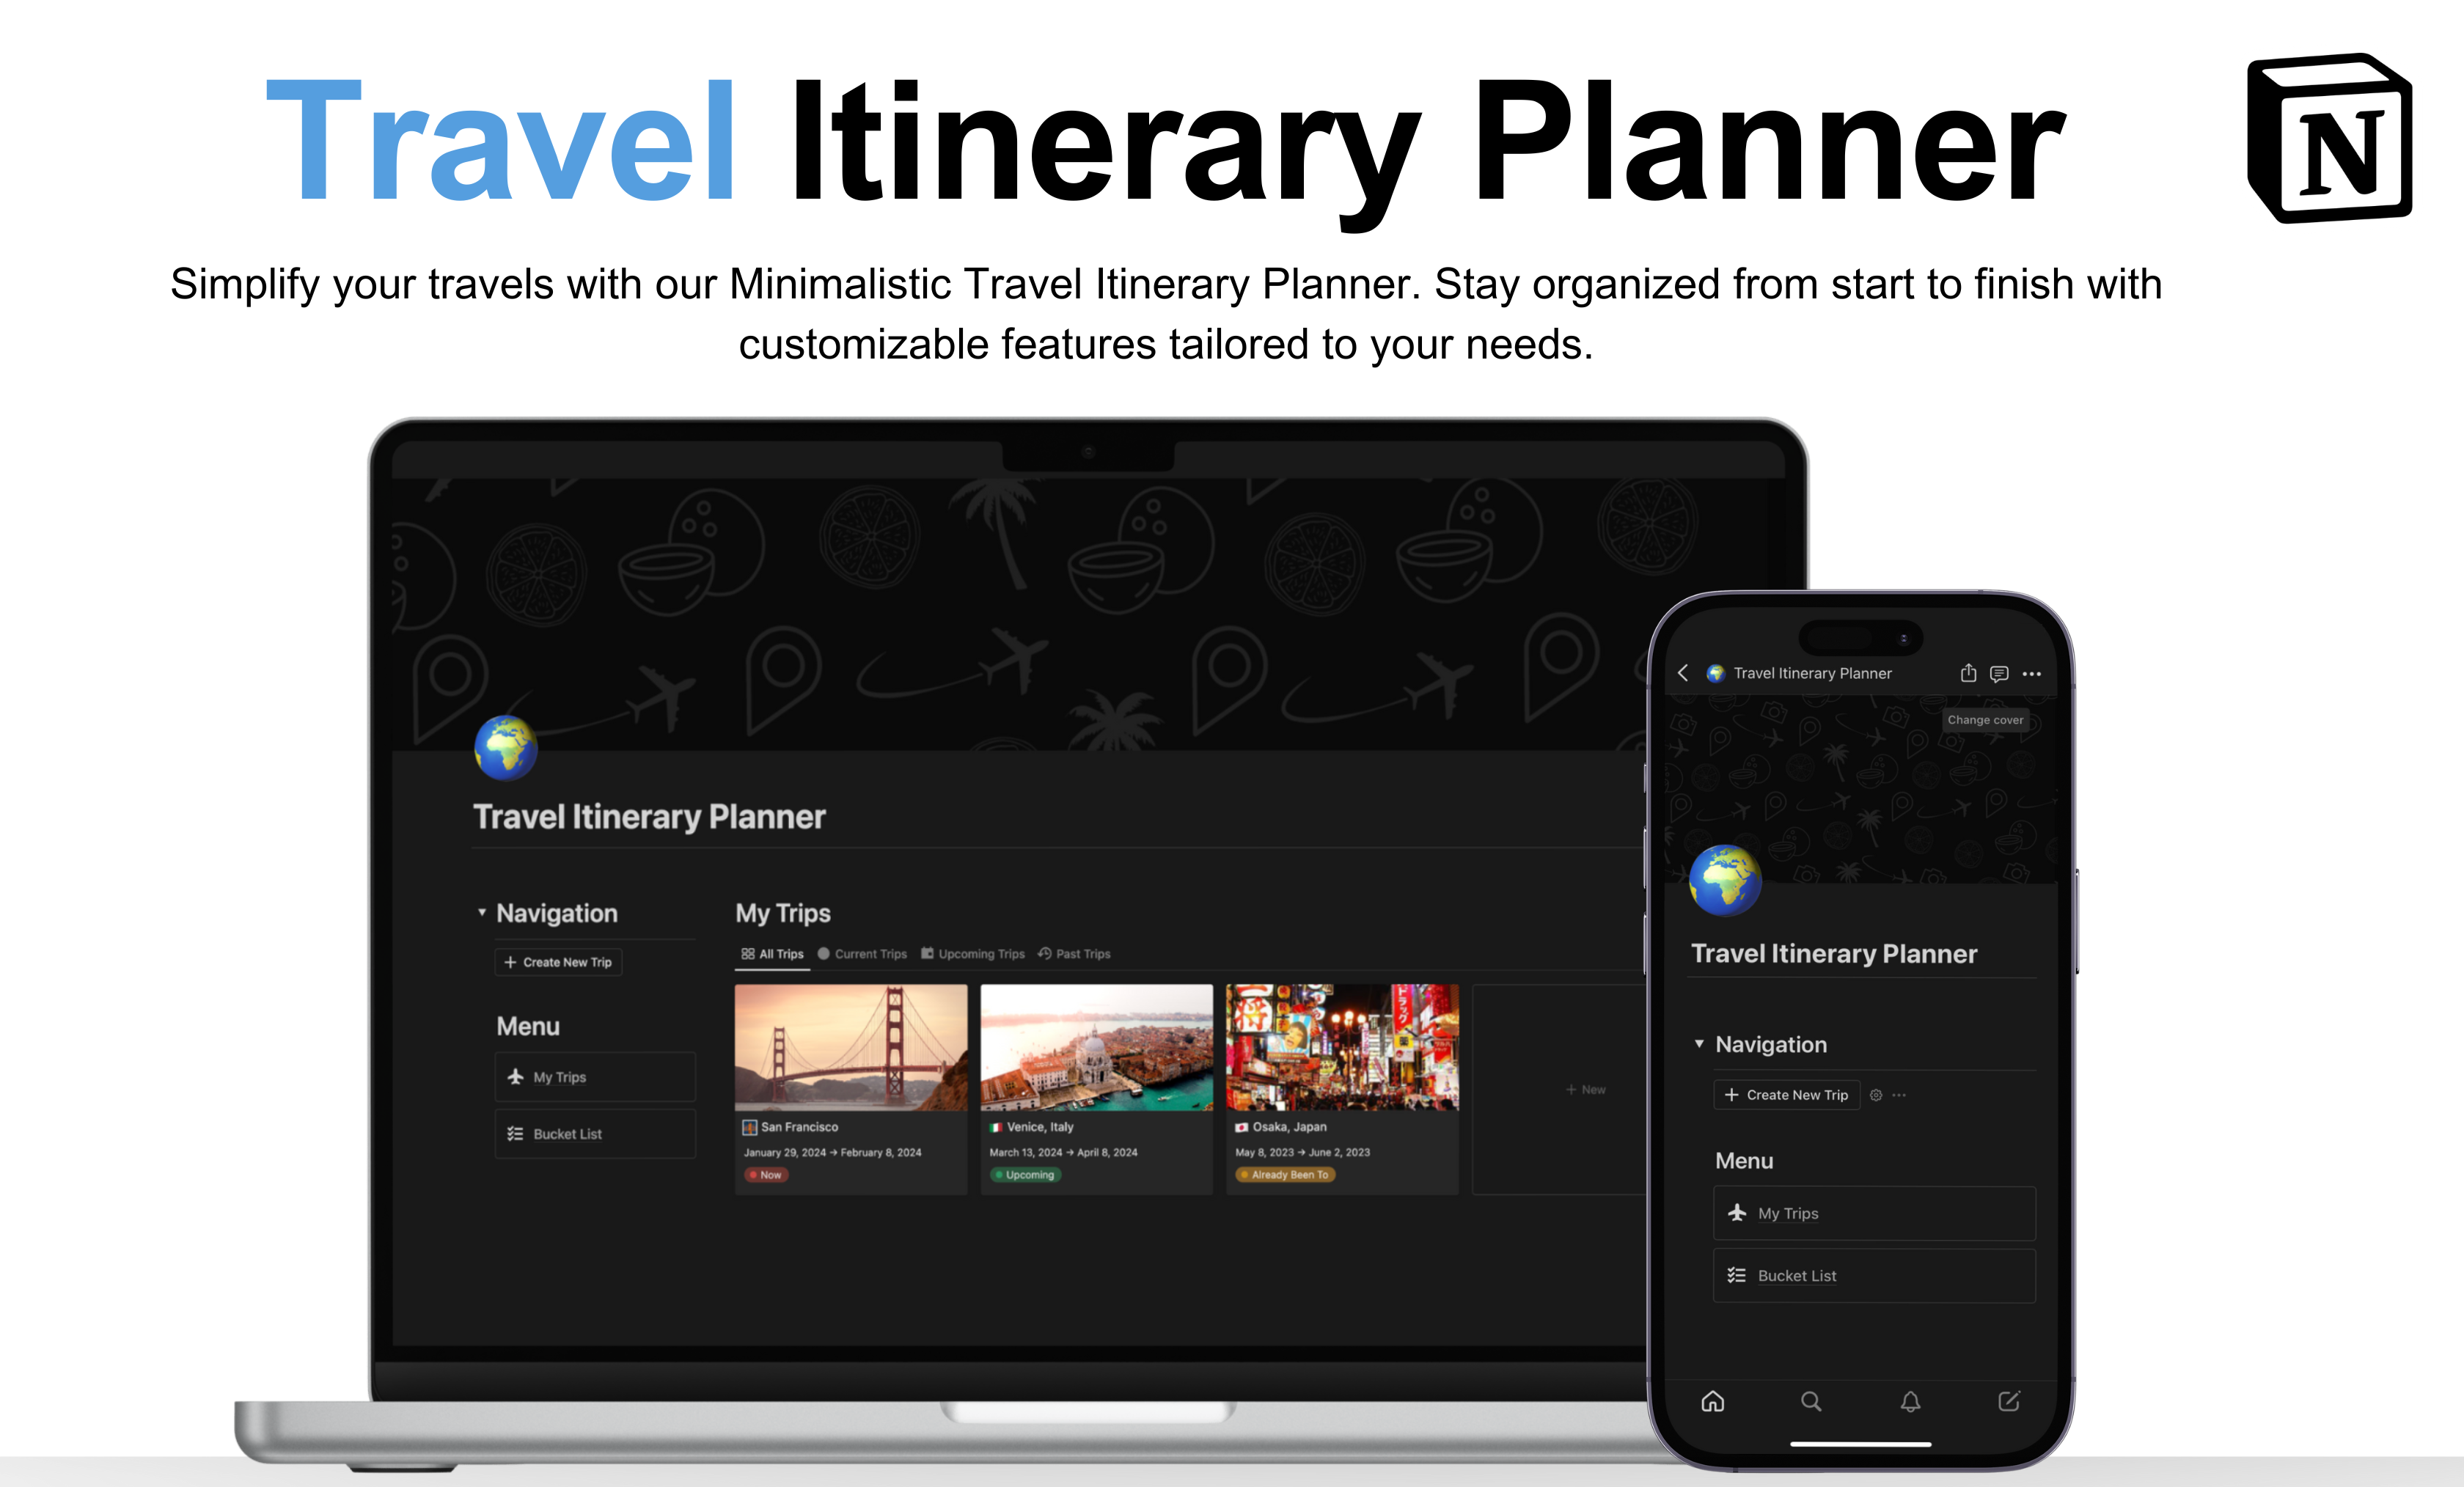 Plan your next adventure effortlessly with the Travel Itinerary Planner! With features like mobile friendly design, customizable templates, packing lists, accommodation info, day planners, and more, it's your ultimate travel planning tool. Start boosting your travels today!